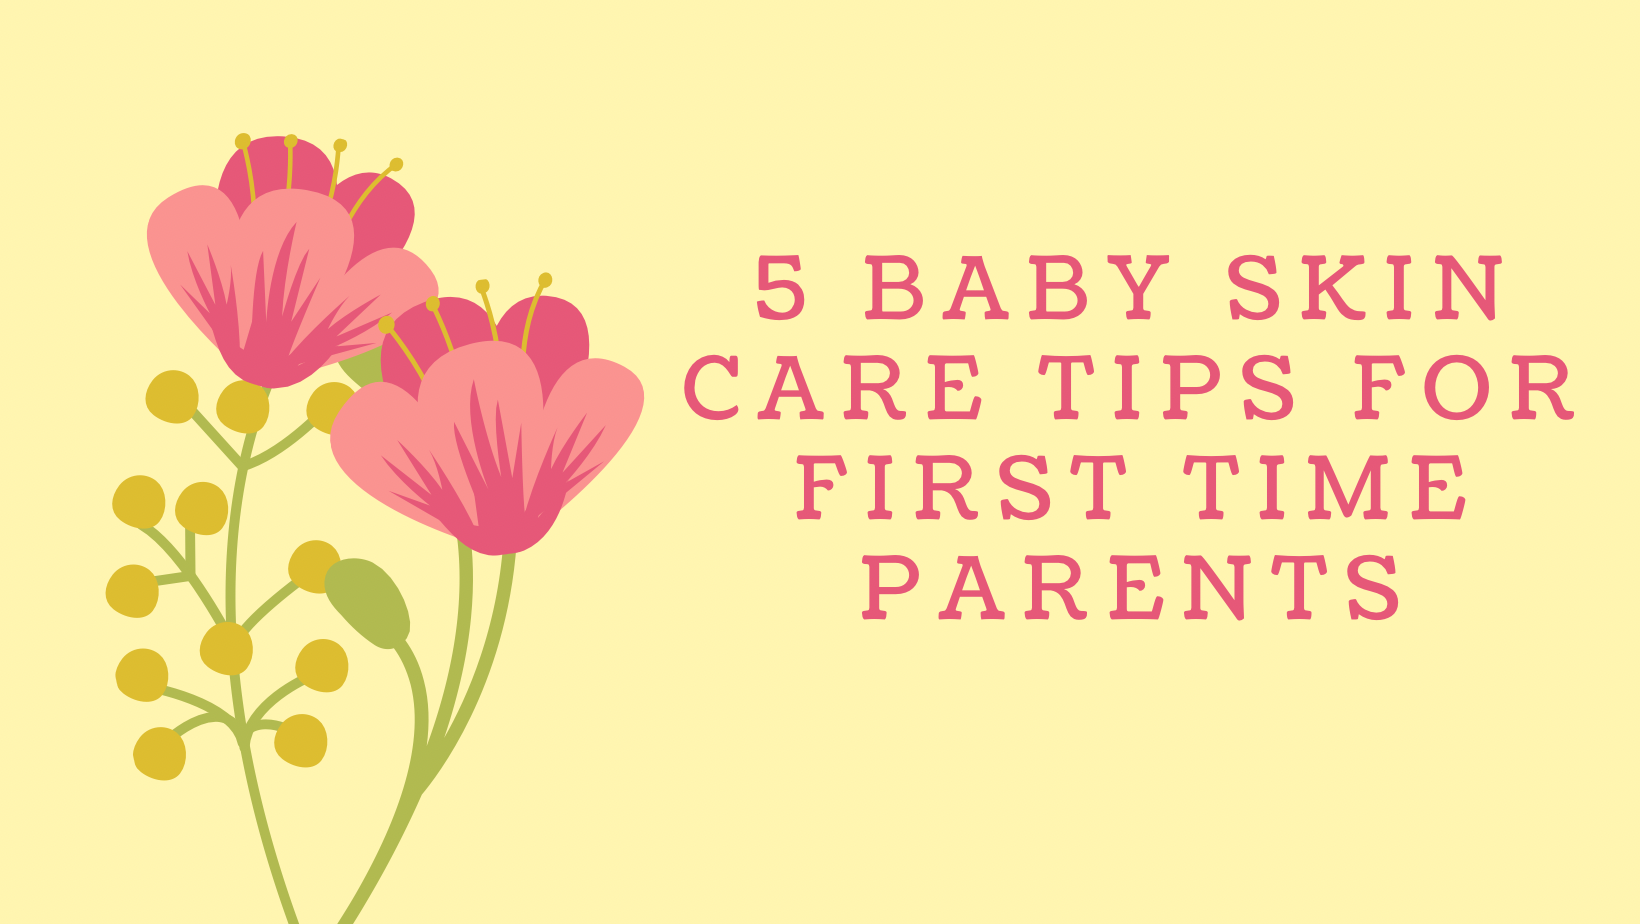 5 Baby Skin Care Tips For First Time Parents